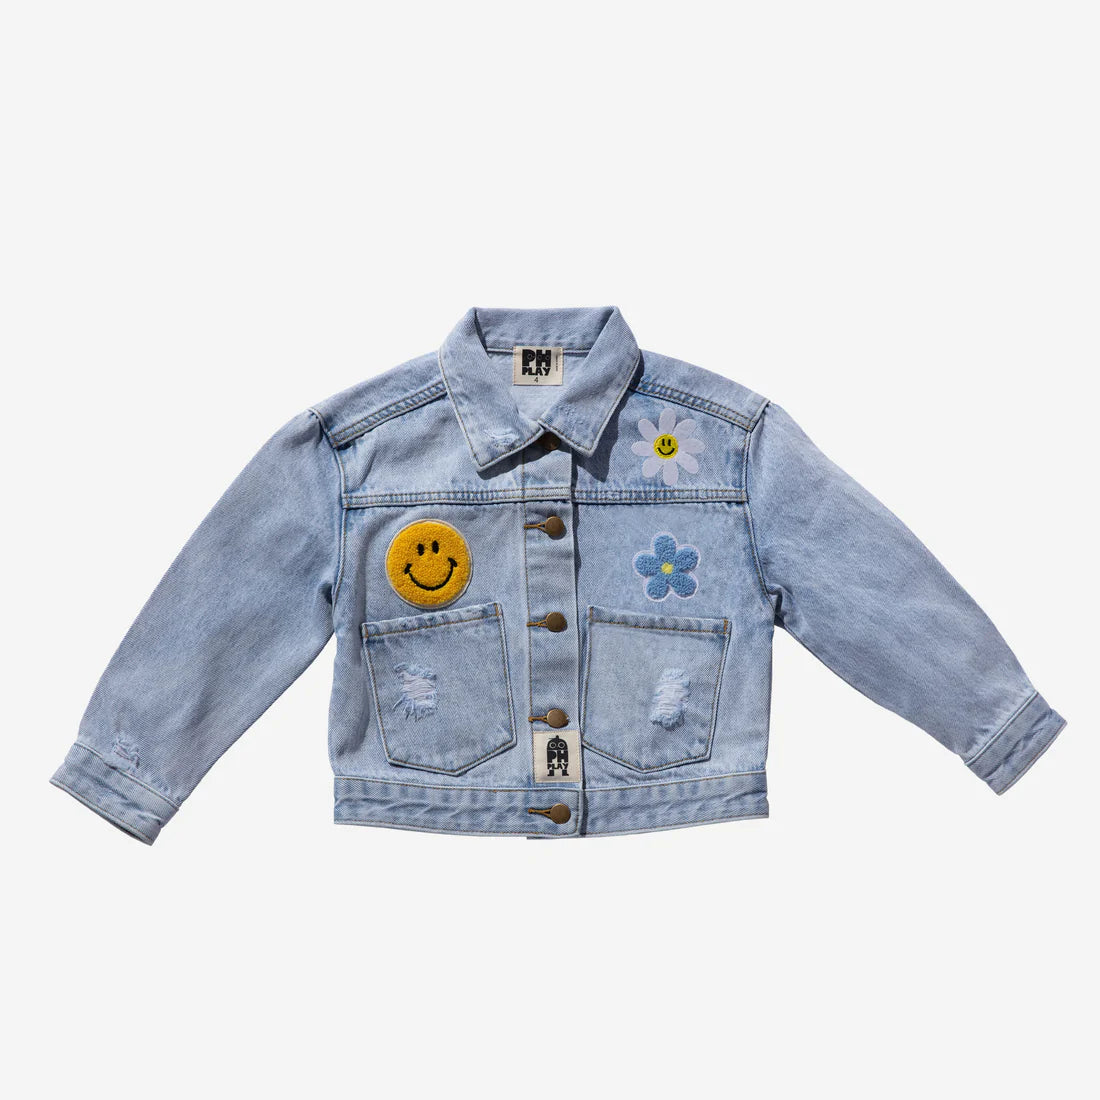 PETITE HAILEY PATCHED DENIM JACKET - DAISY